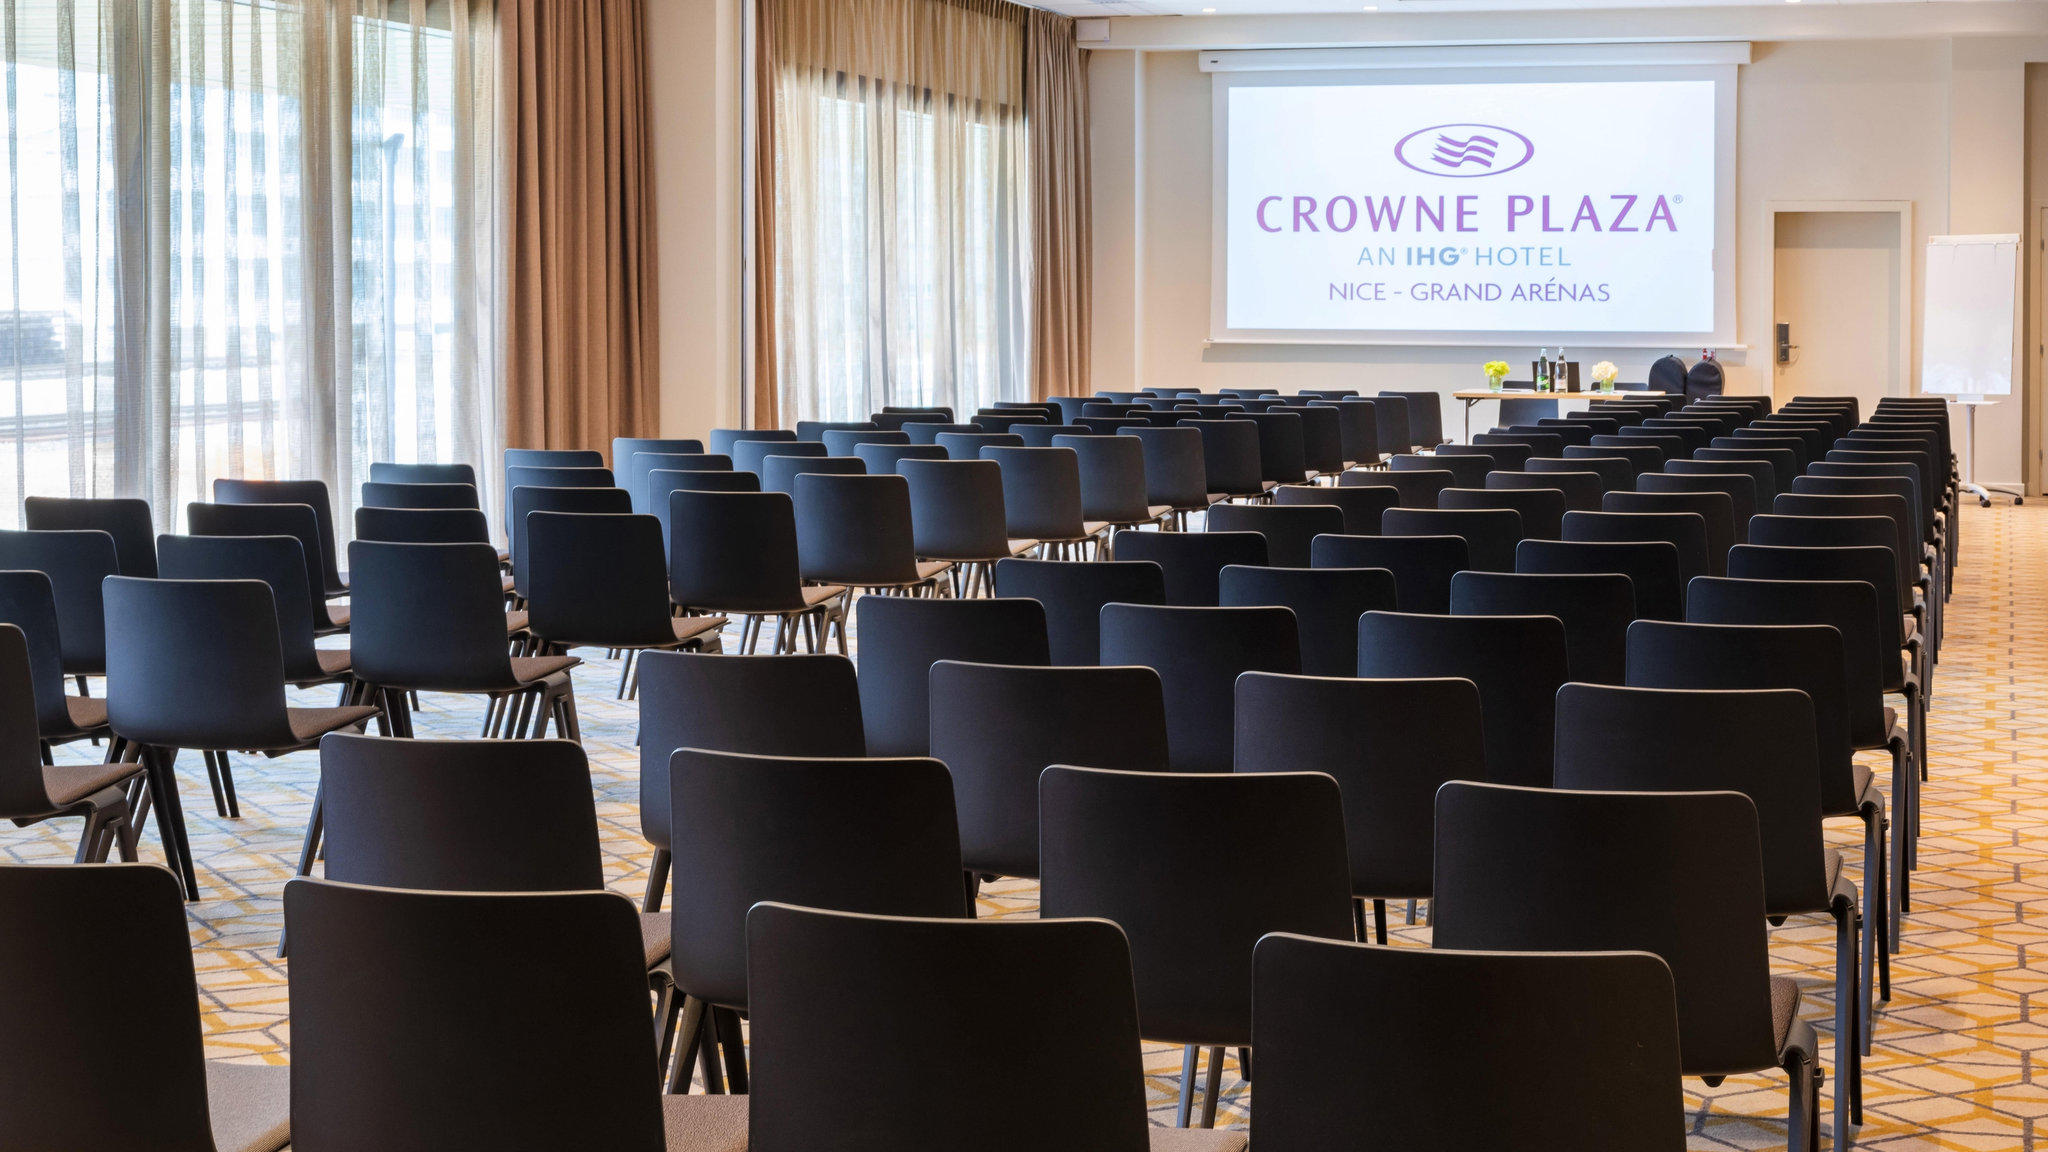 Images Crowne Plaza Nice - Grand Arenas, an IHG Hotel